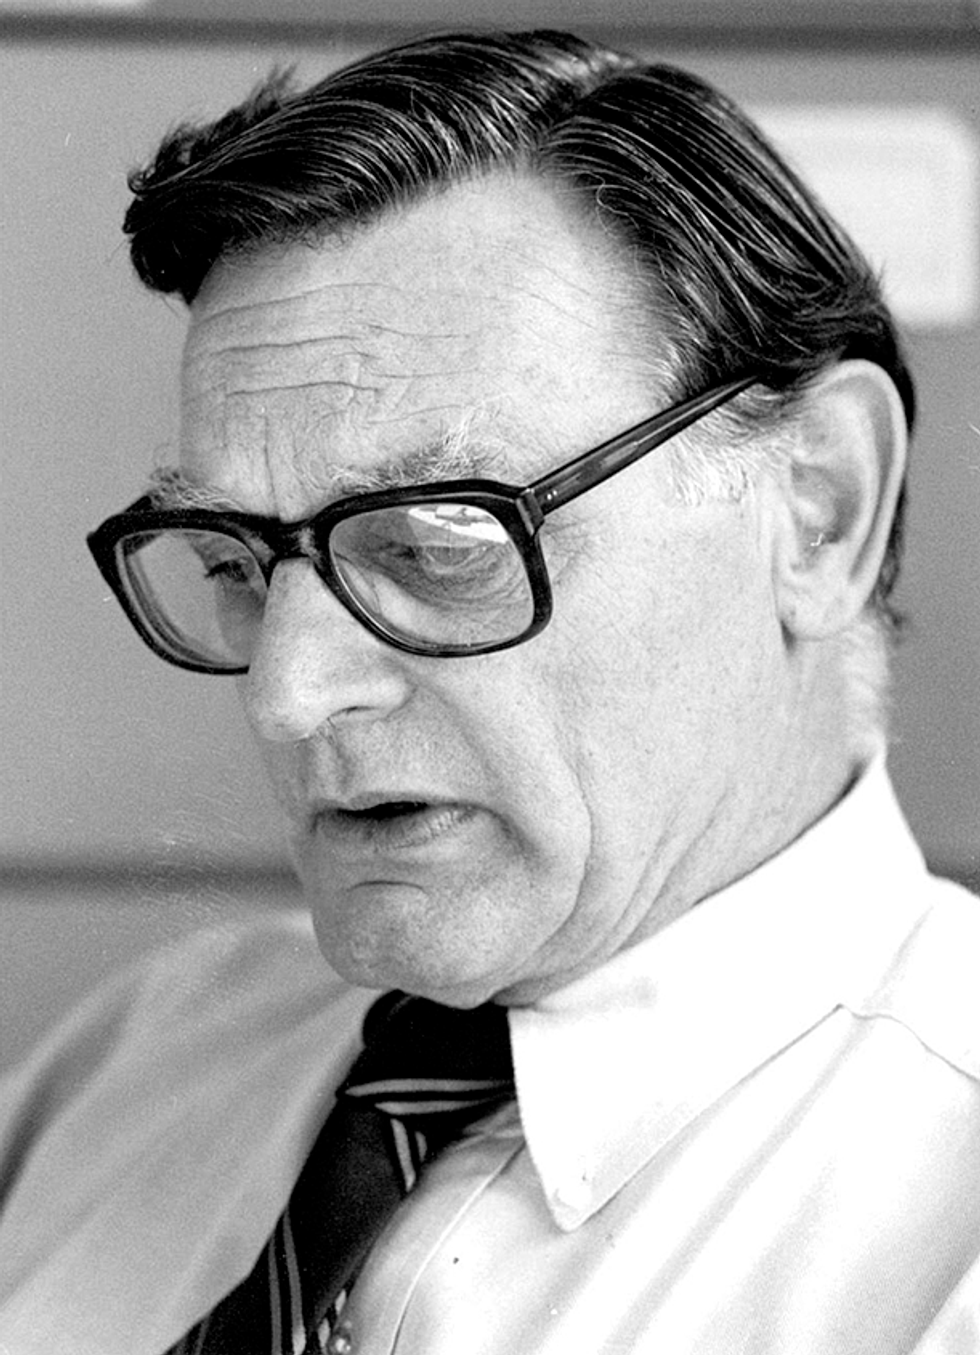 A photo that shows a closeup of a man with glasses